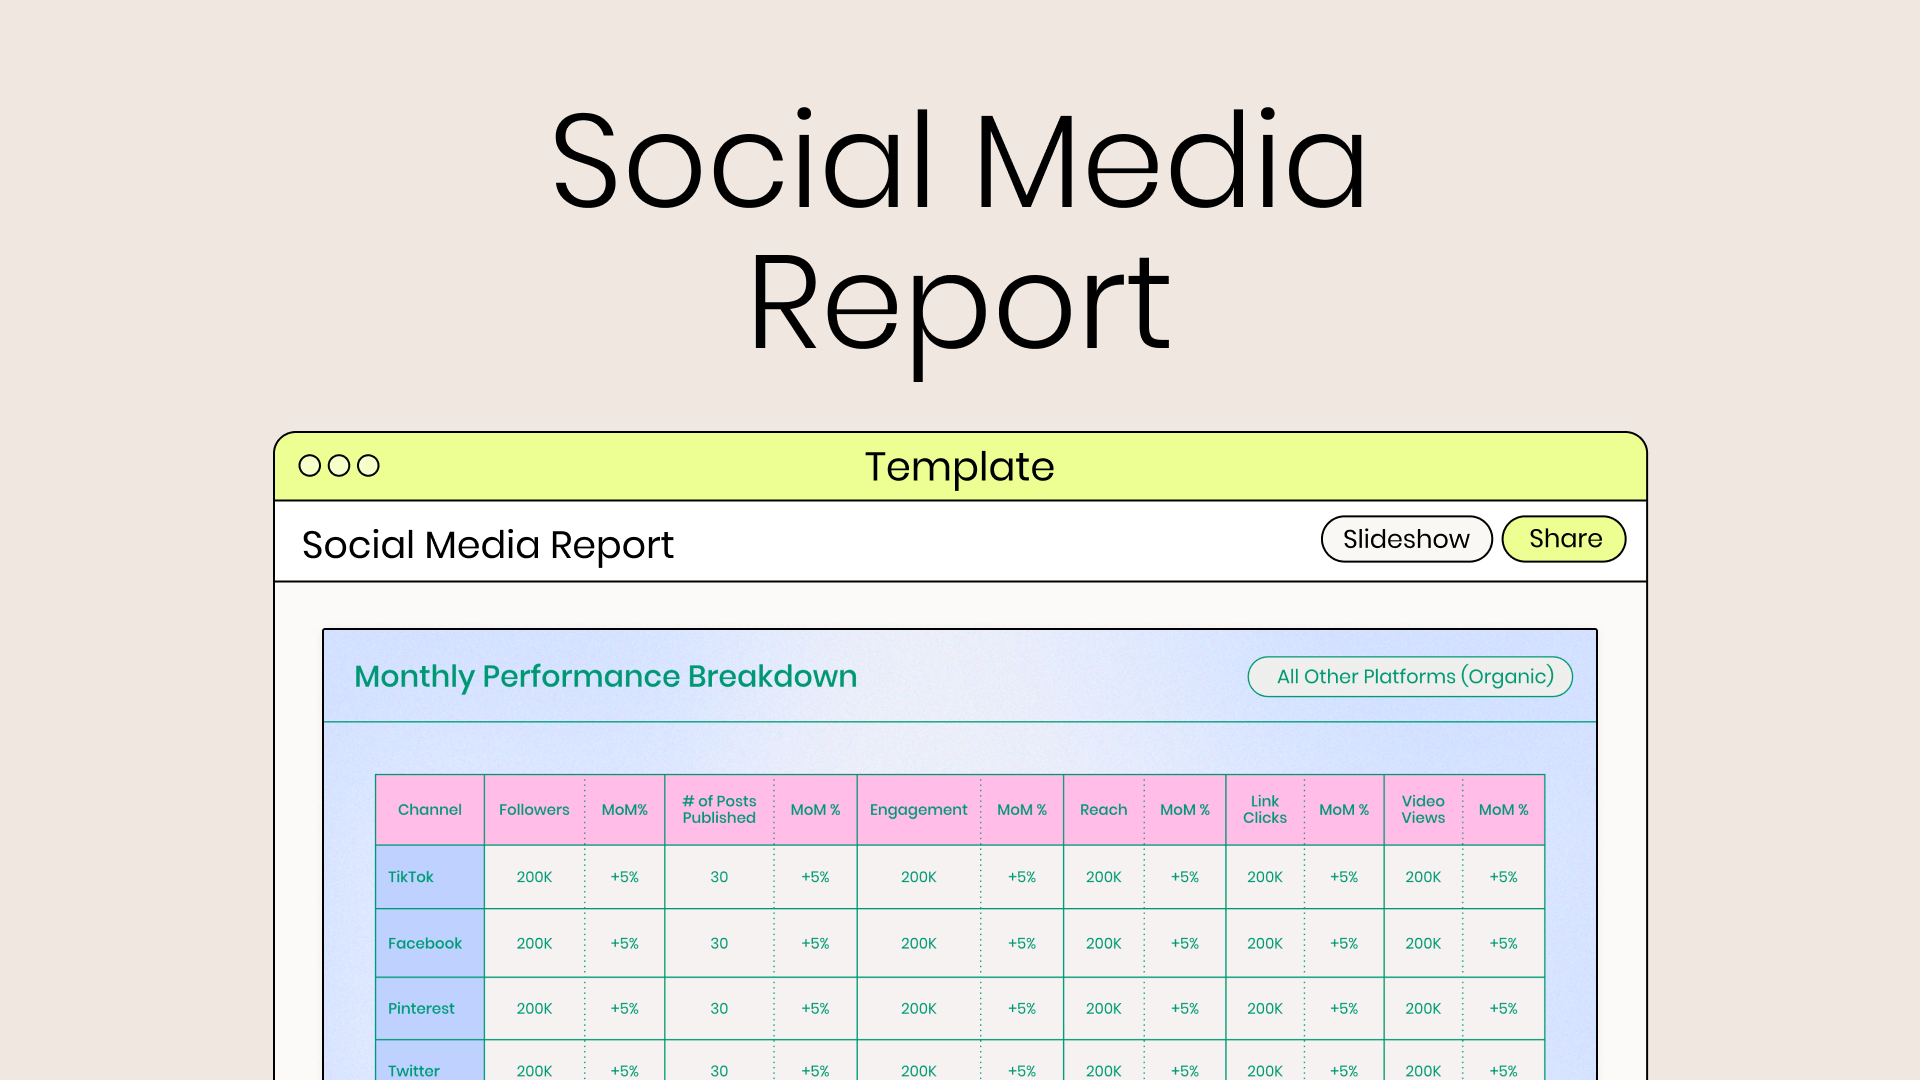 Social media report example of monthly performance breakdown chart